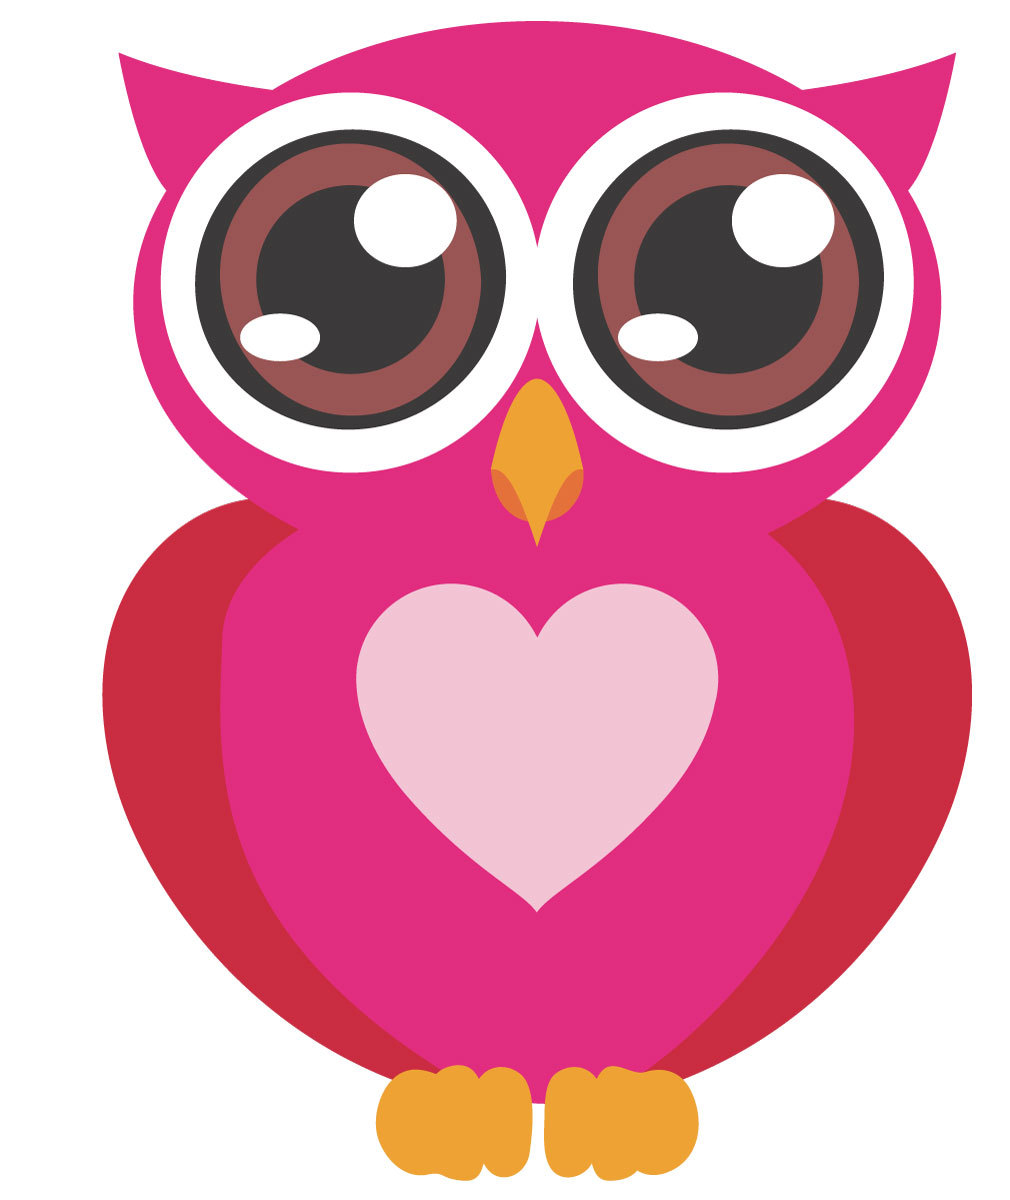 Small Owl Clipart.